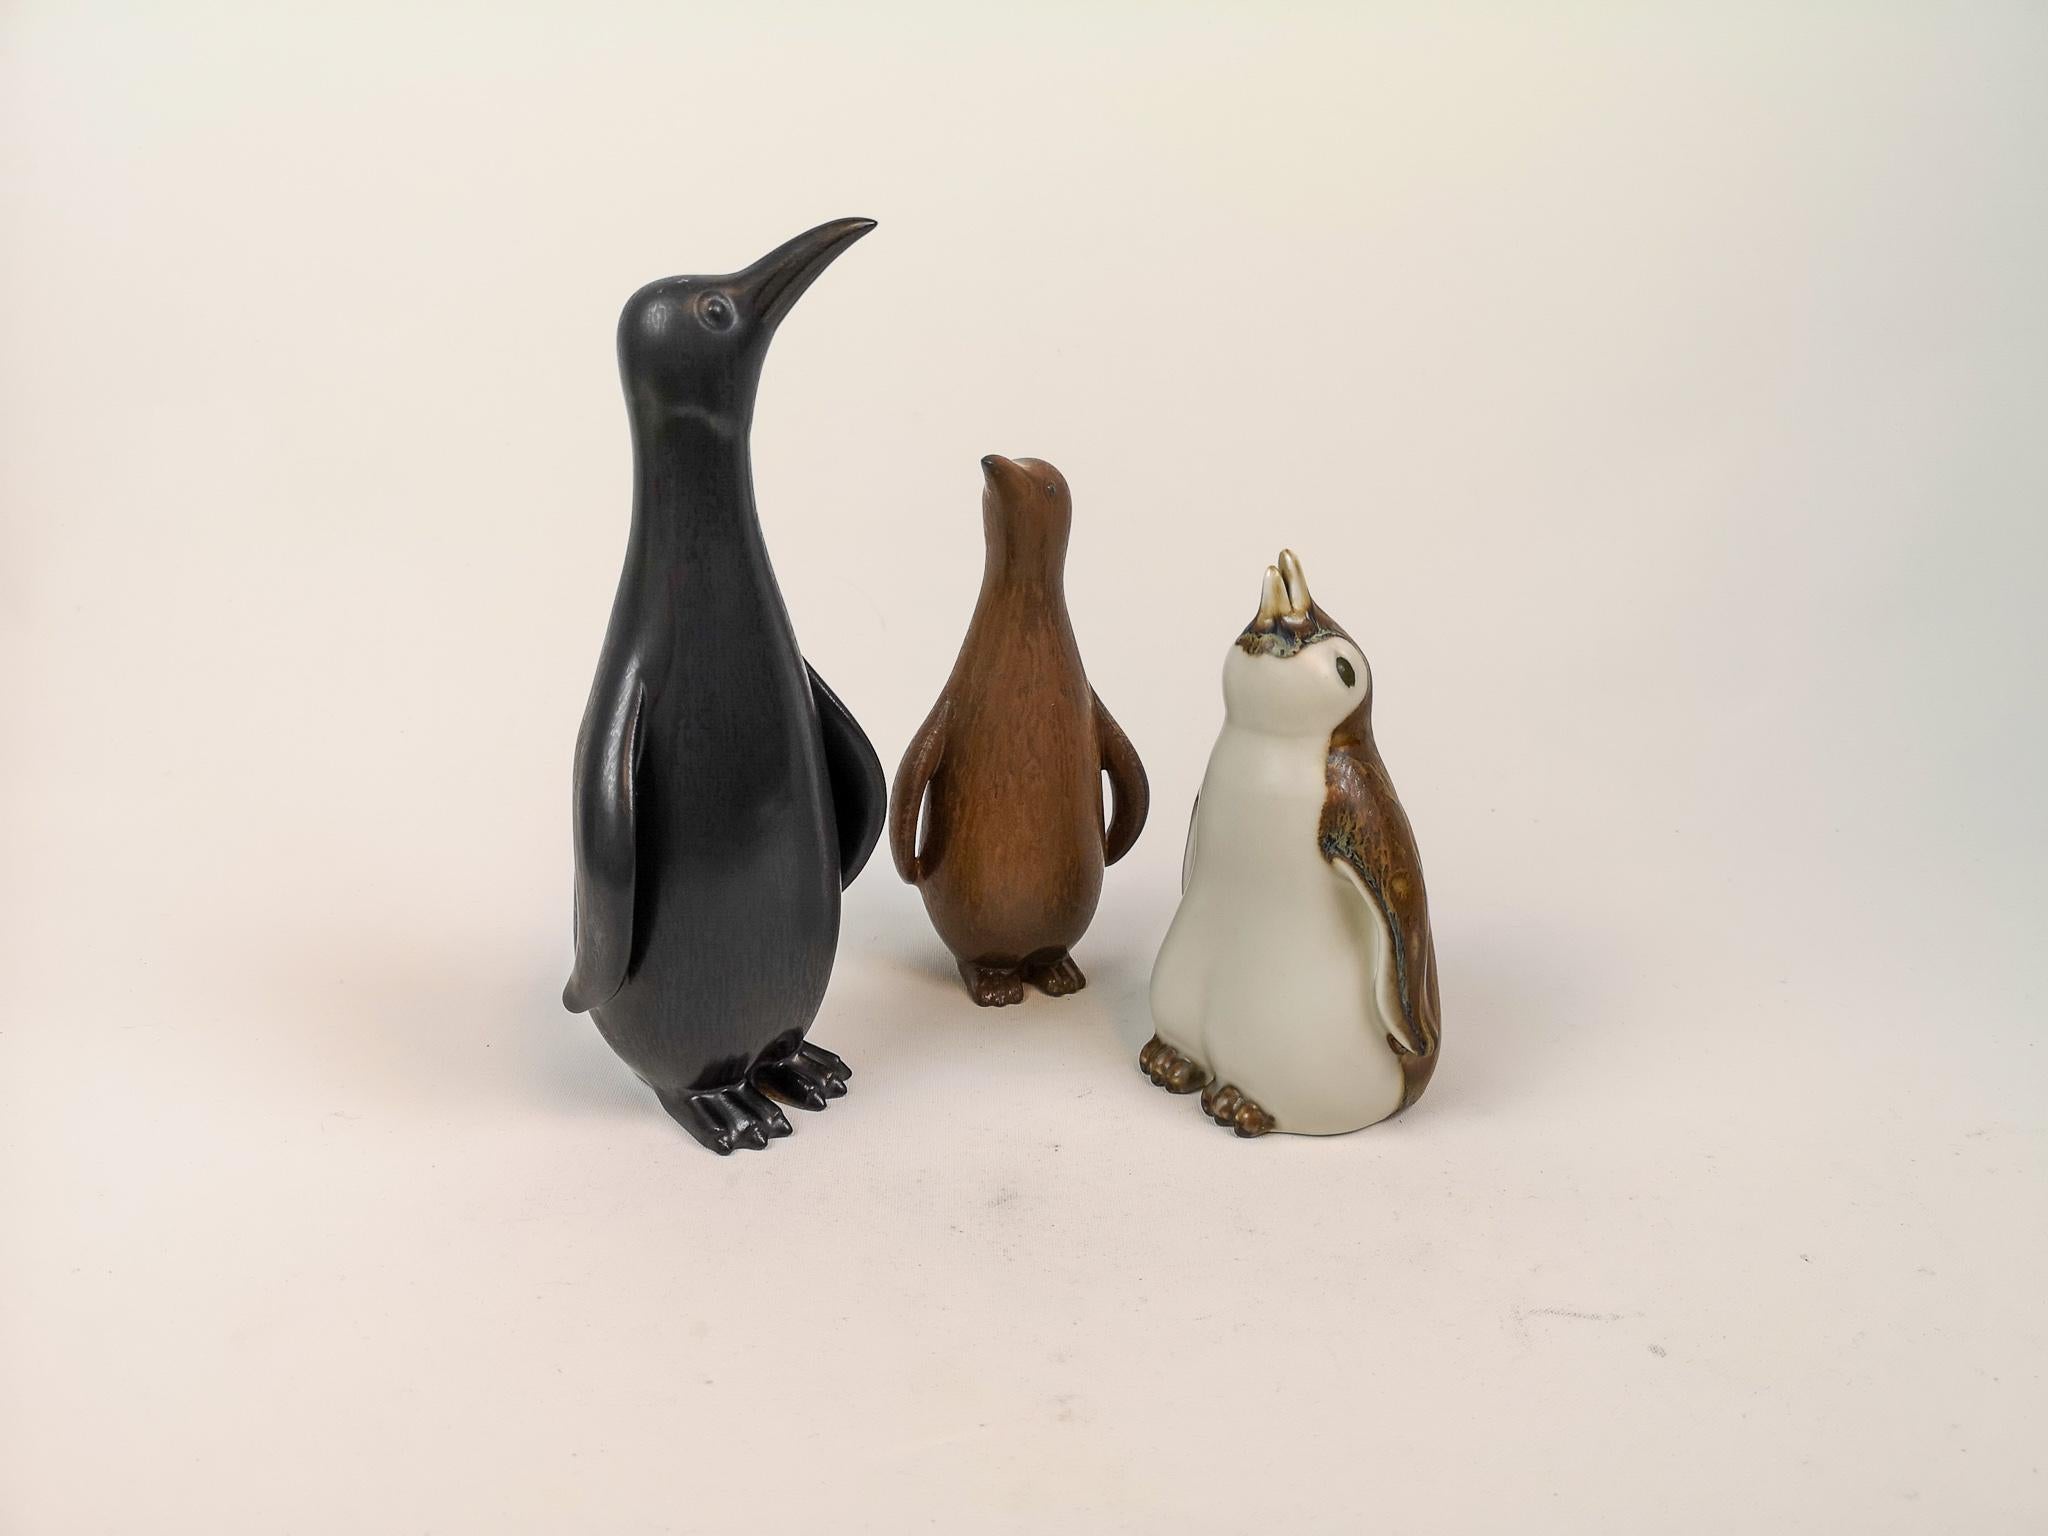 This set is 3 pieces of ceramic penguins from Rörstrand and maker/Designer Gunnar Nylund. Made in Sweden in the midcentury. Beautiful glazed and in good condition.

Measures Large on H 22 cm W 9 cm 

